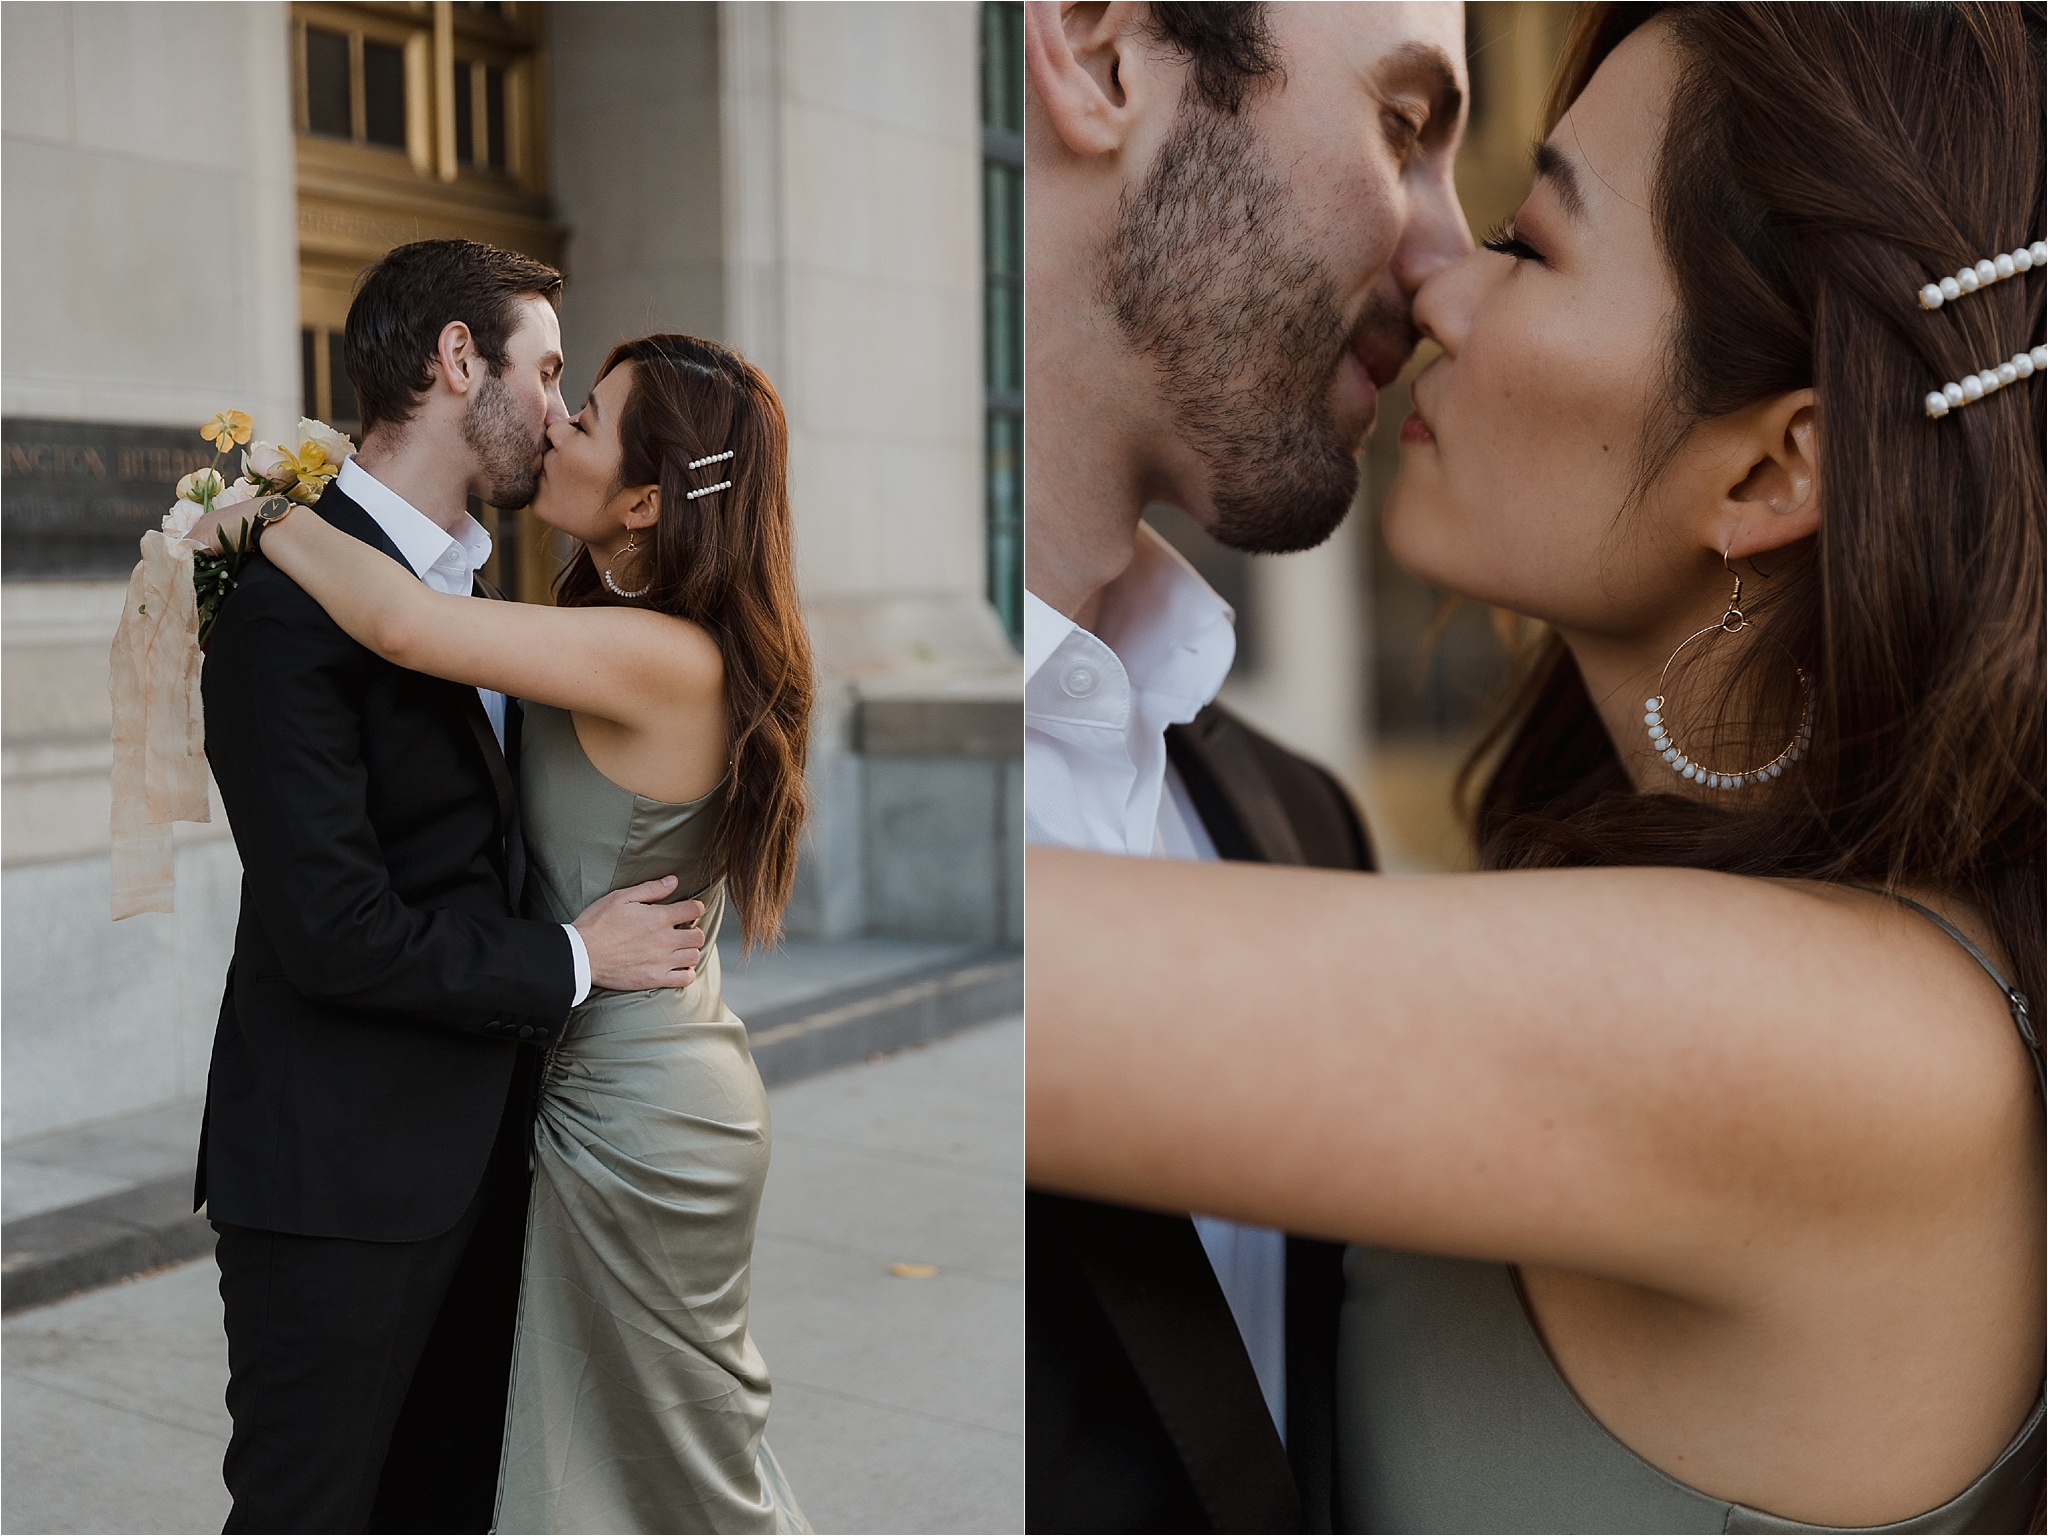 Downtown Ottawa elopement photo shoot ombre bouquet, Wellington building, photography by Sonia V Photography